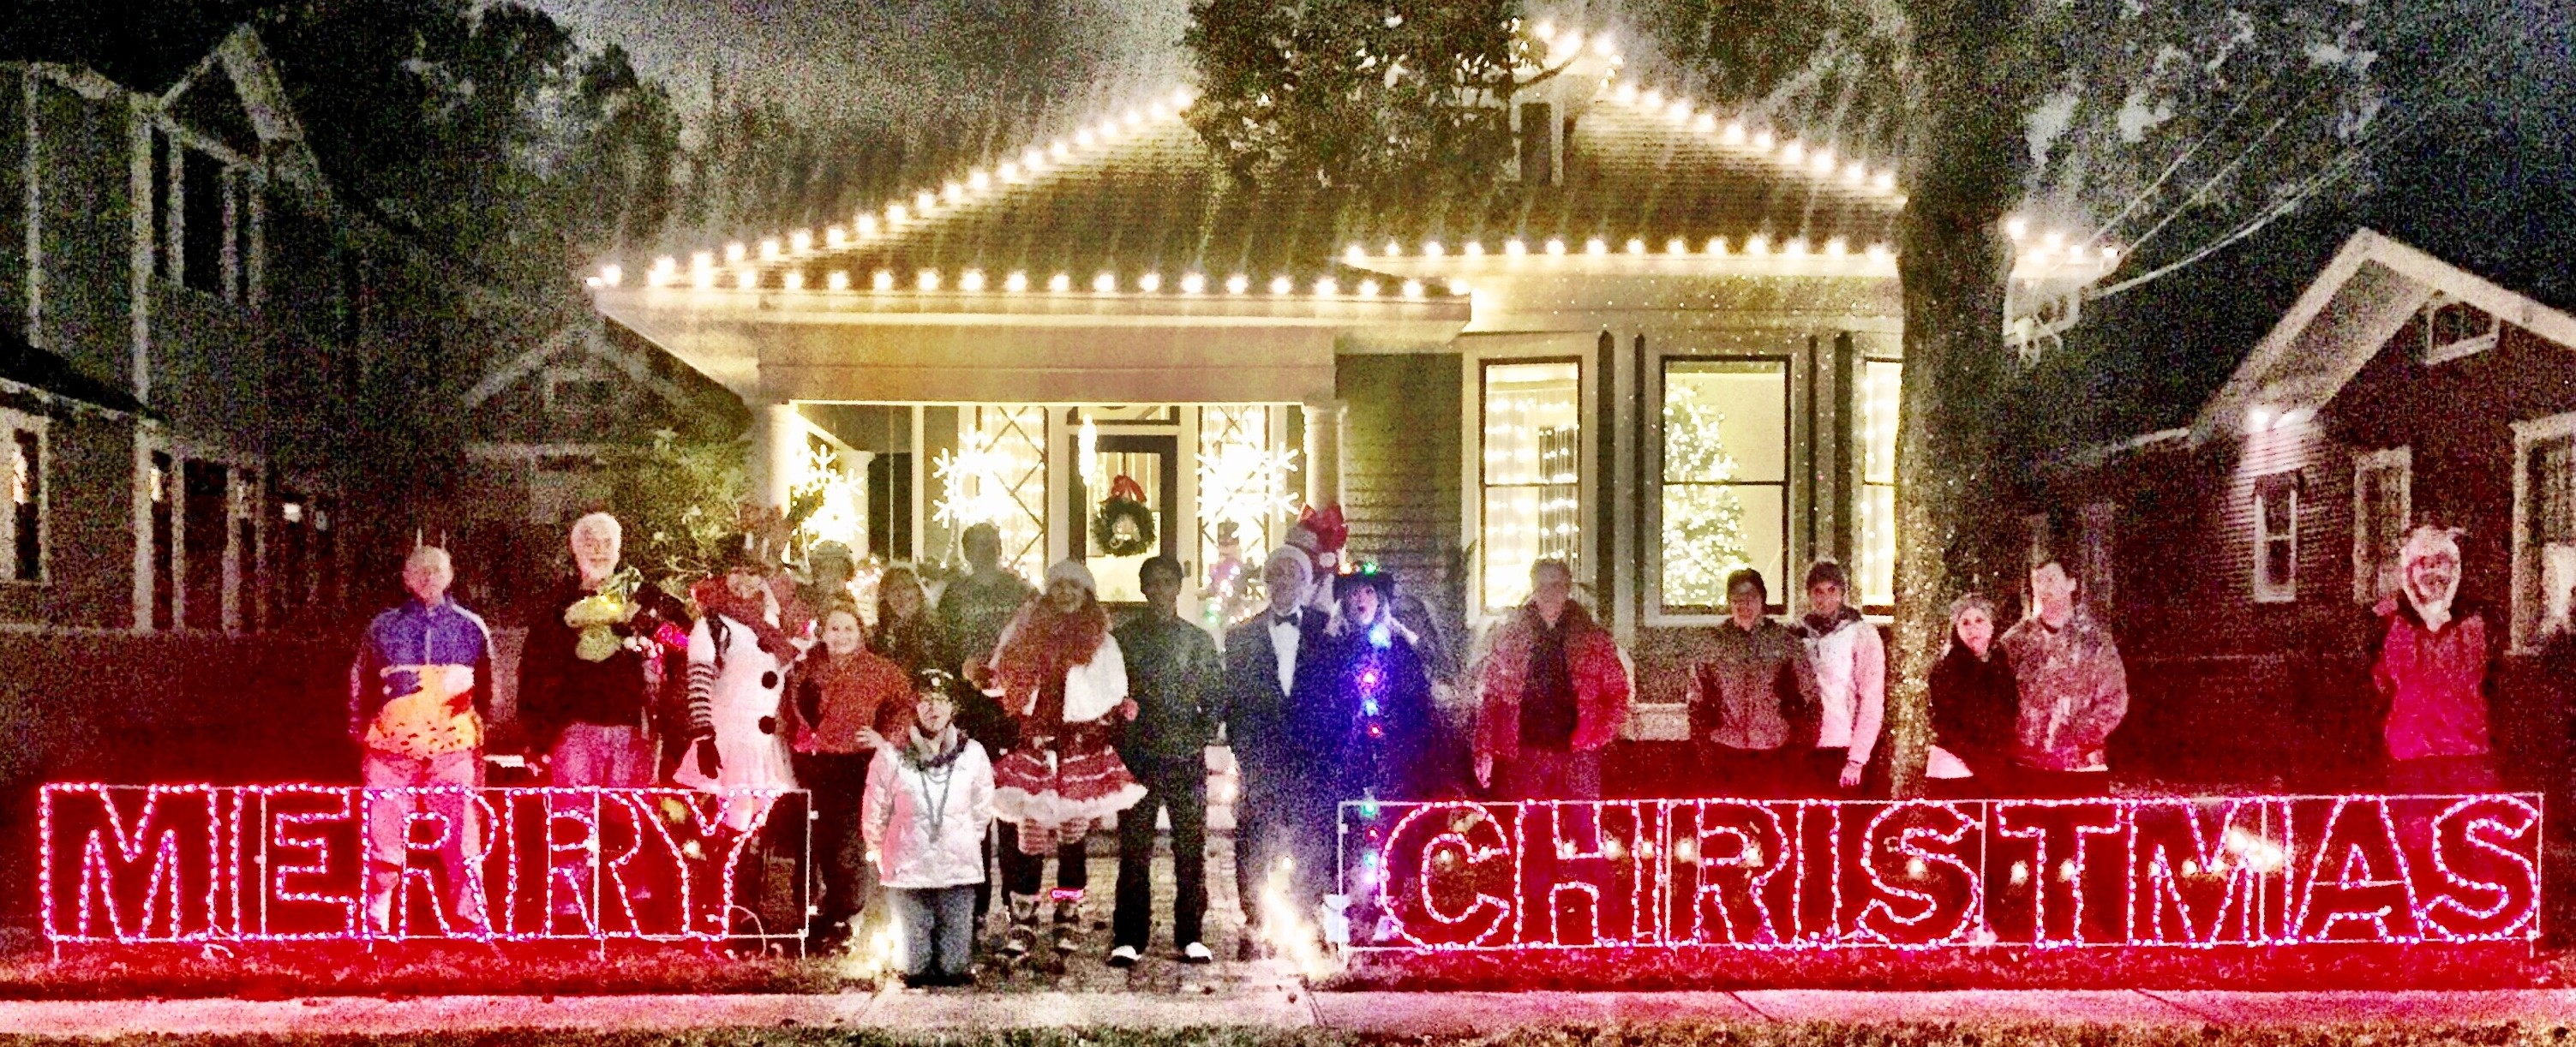 2016-12-09 Lights in the Heights Group Picture